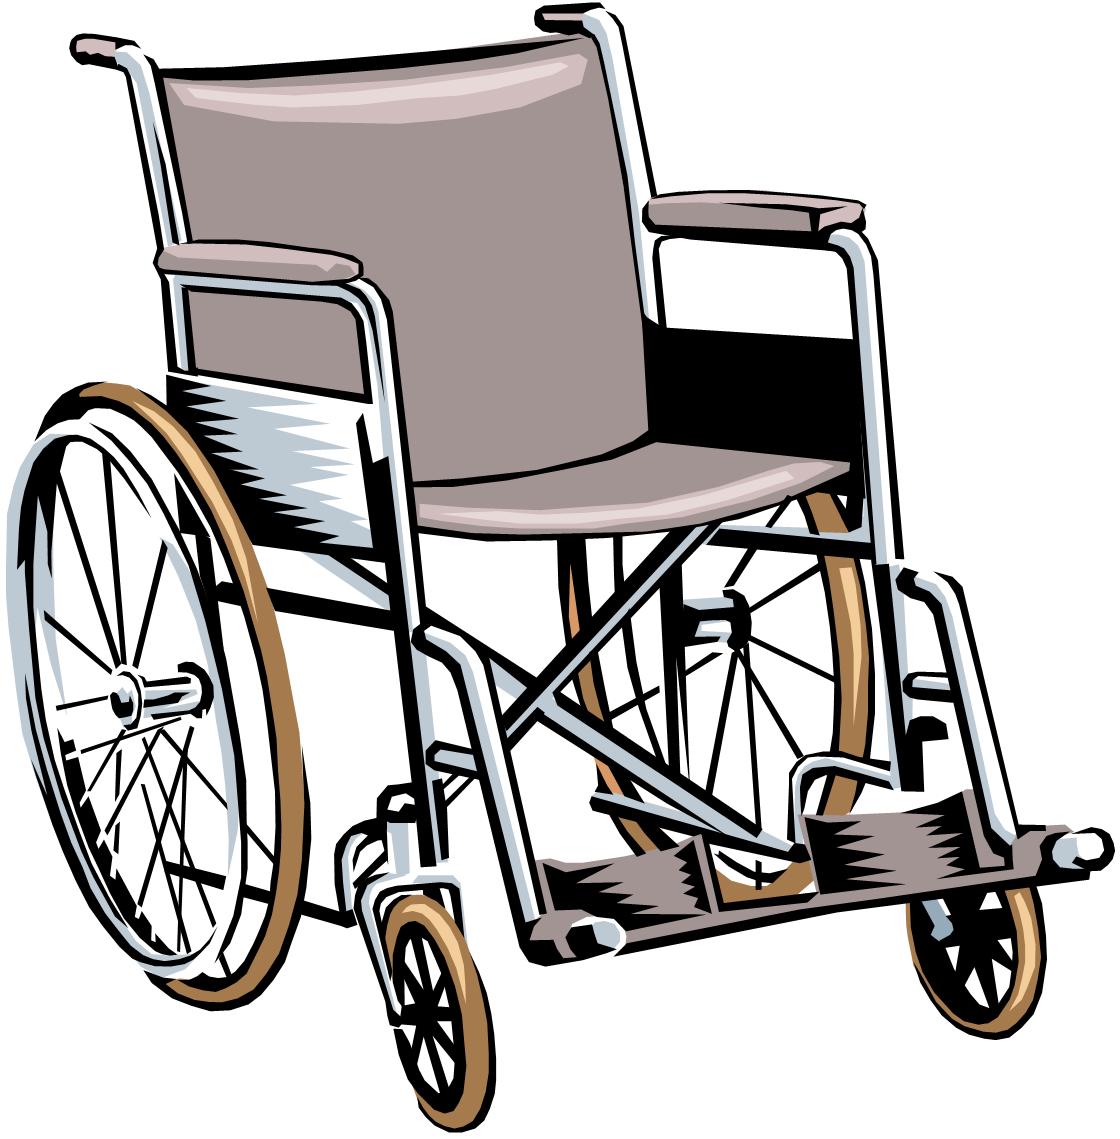 Free Wheelchairs Cliparts, Download Free Clip Art, Free Clip